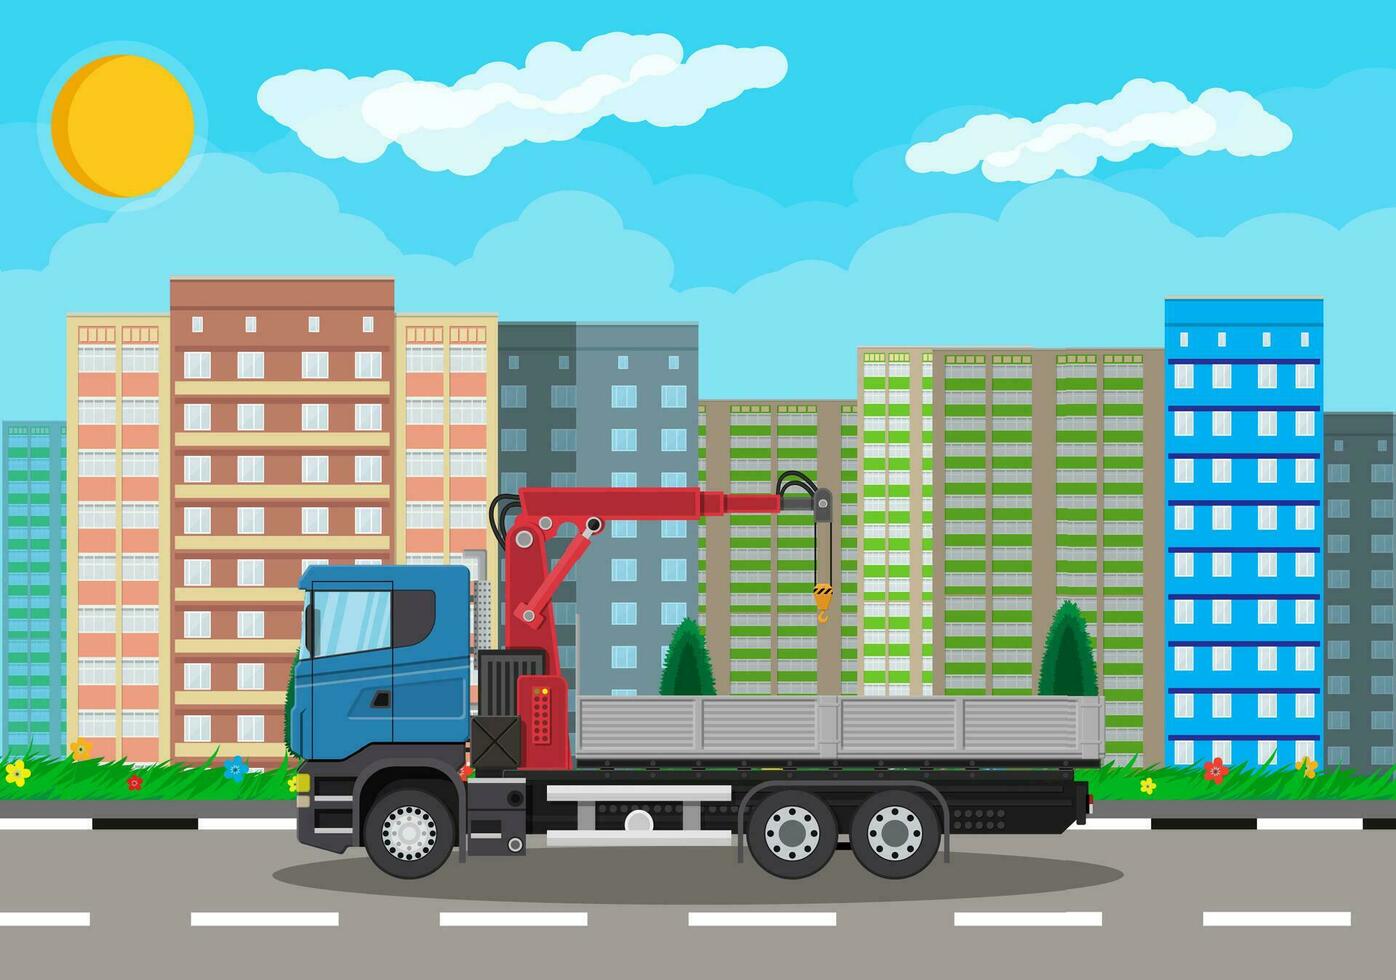 Truck with crane and platform. Cargo delivery truck. Vehicle for construction and building. Car for transport. Trailer vehicle. Cityscape, road, buildings, tree, sky. Vector illustration in flat style